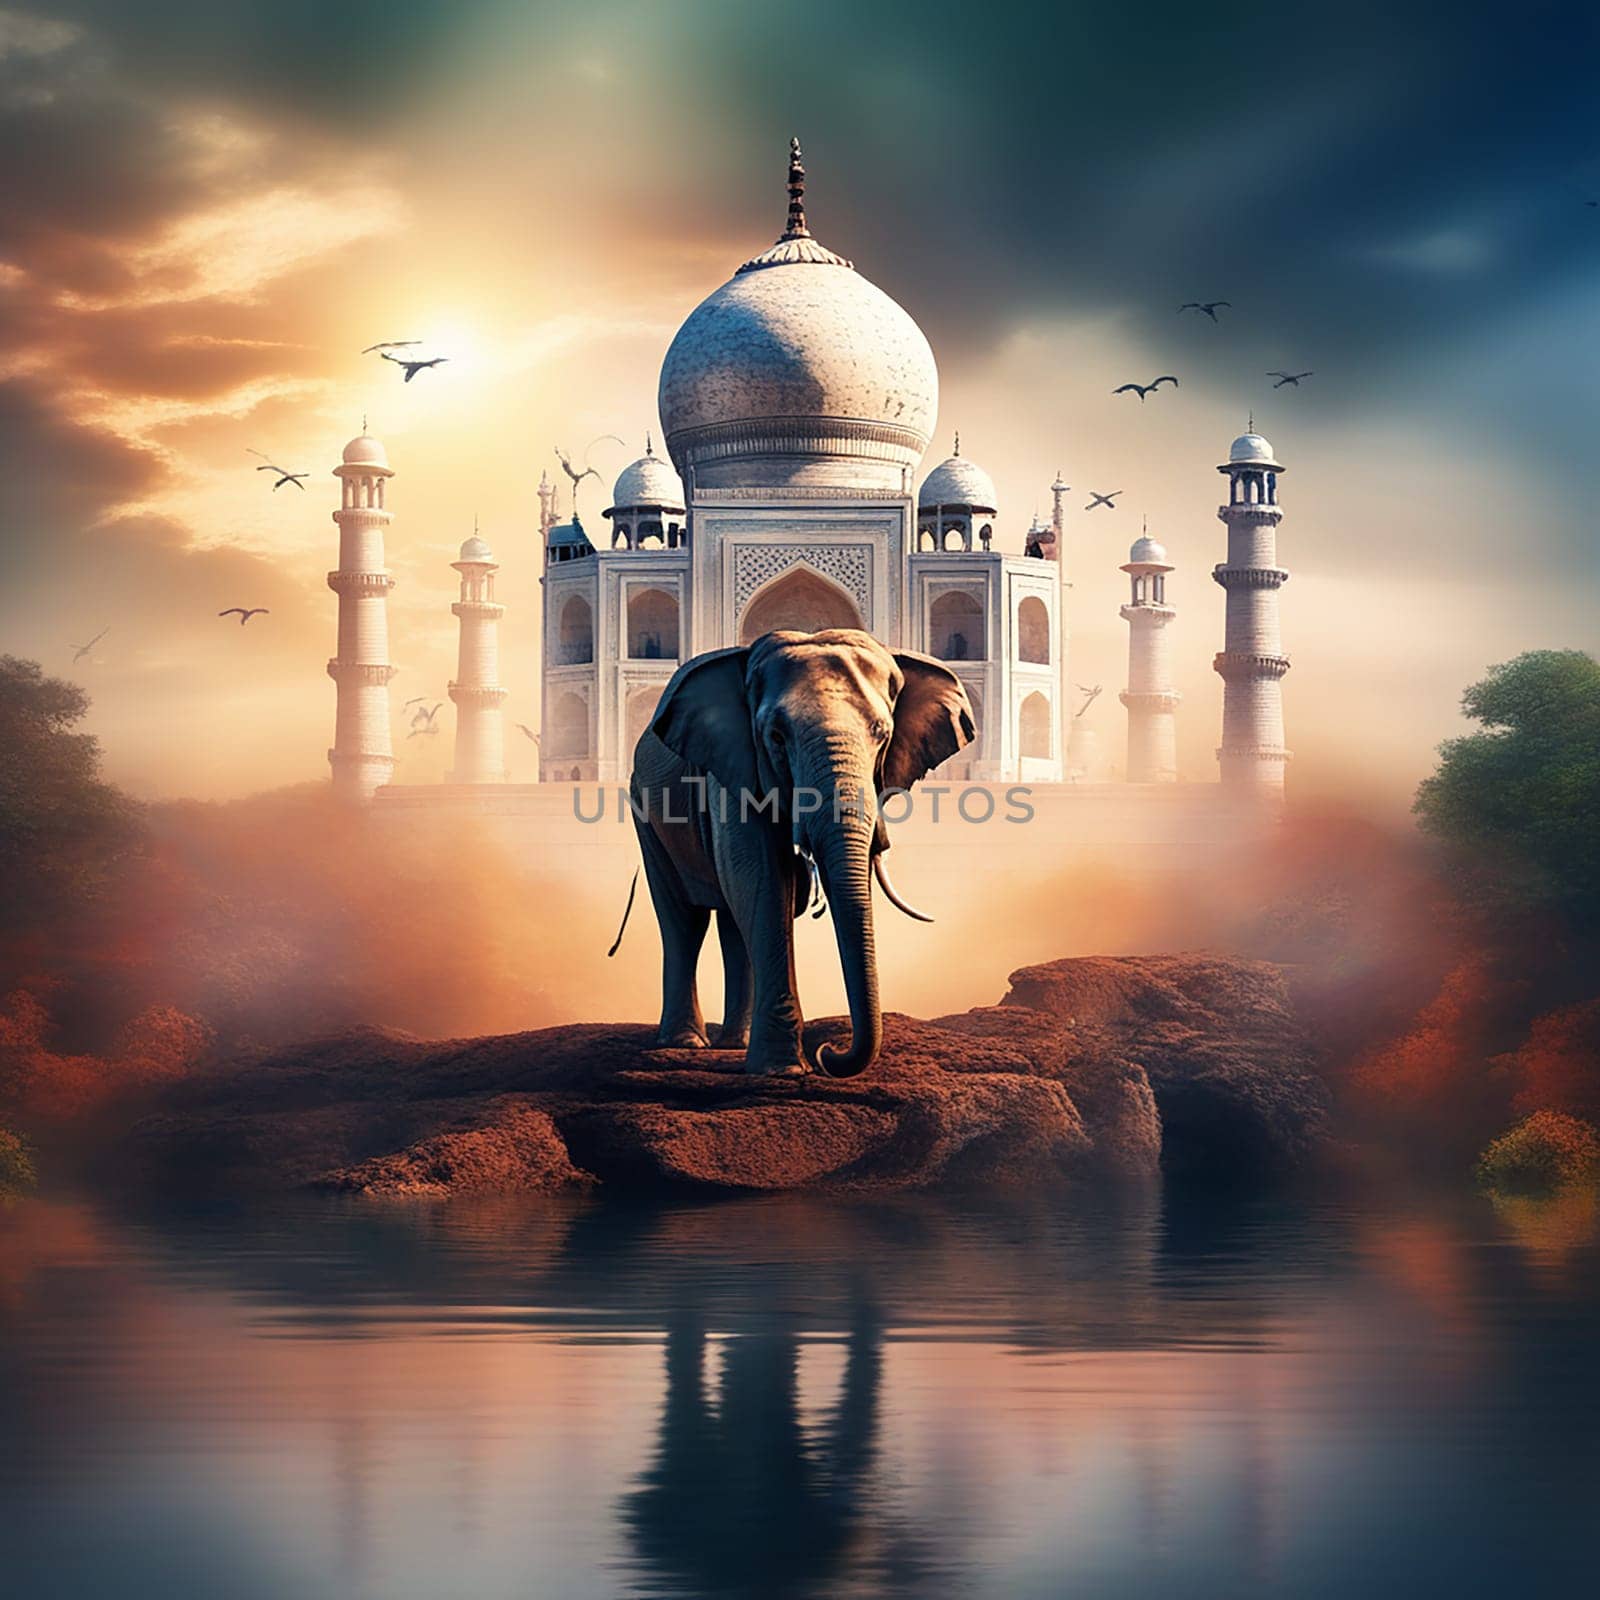 Indian Elephant on a Cliff Ledge with the Taj Mahal in the Surreal Fantasy Landscape